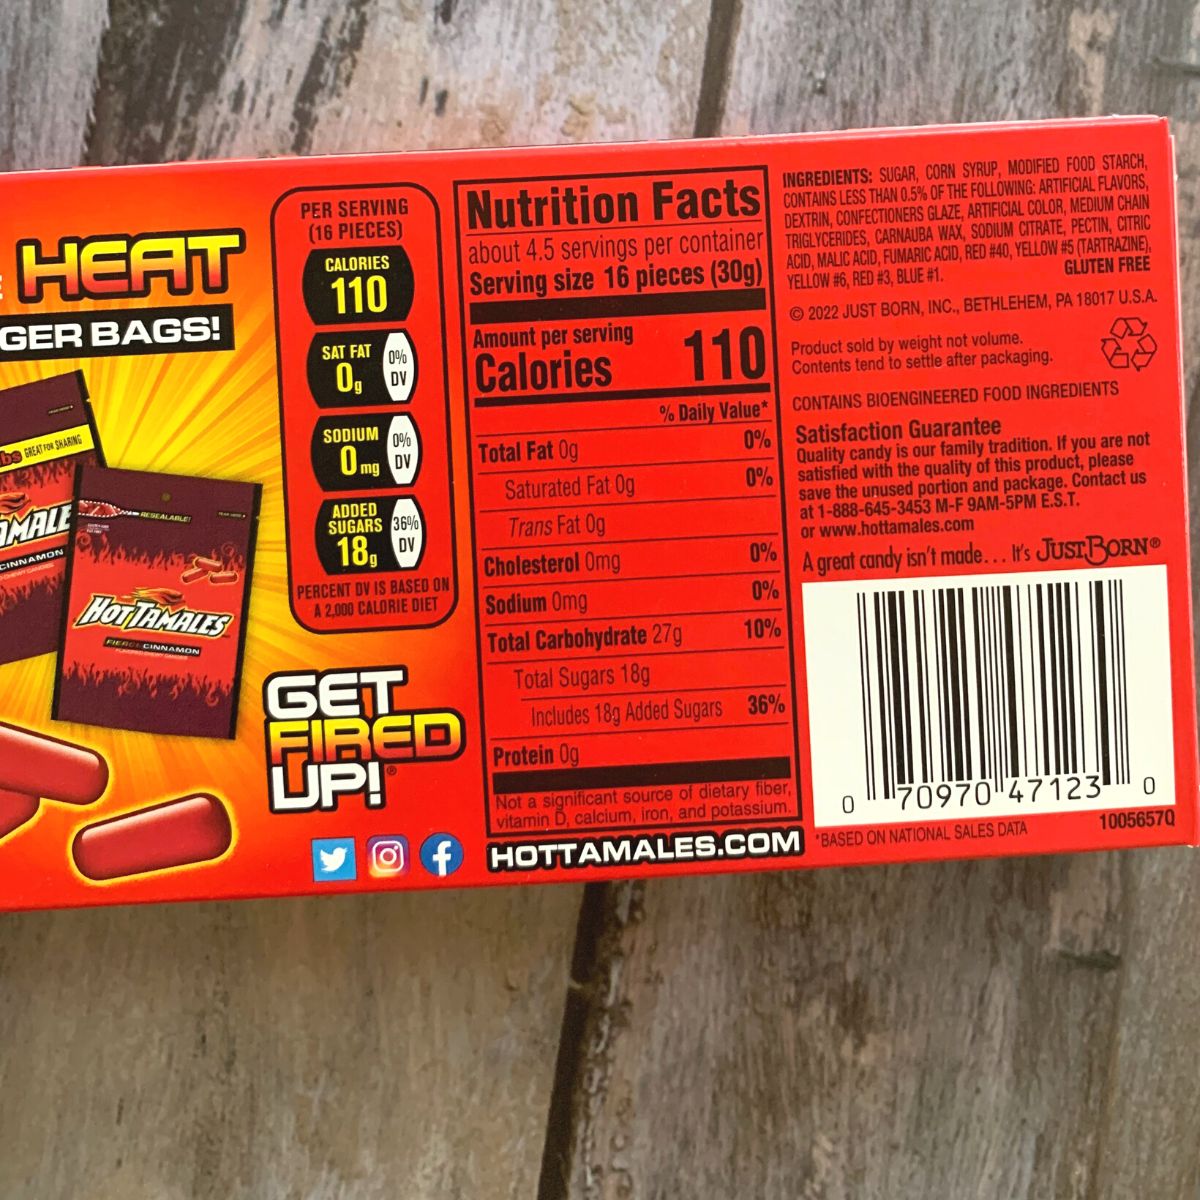 A photo of the back of the box showing the ingredients list.